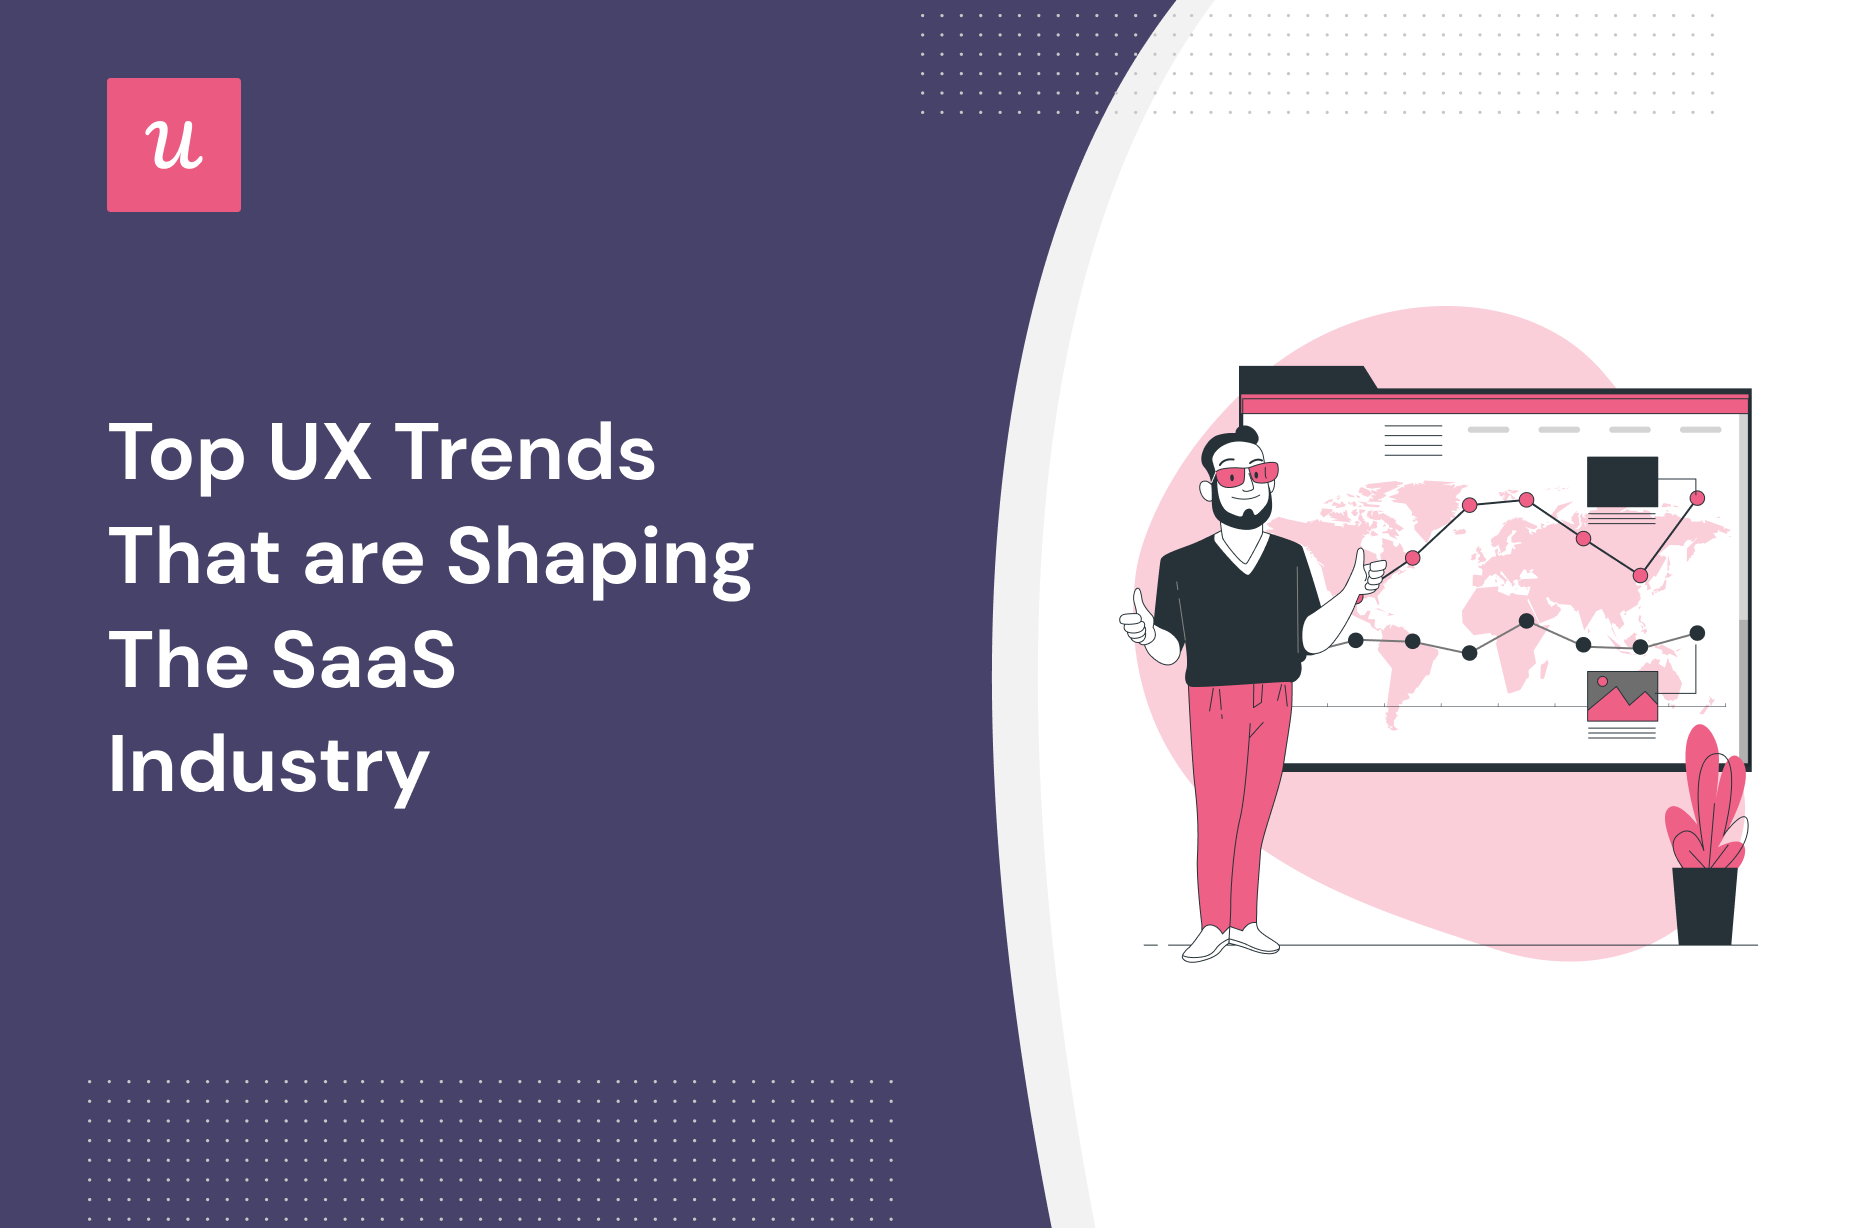 Top UX Trends That Are Shaping the SaaS Industry